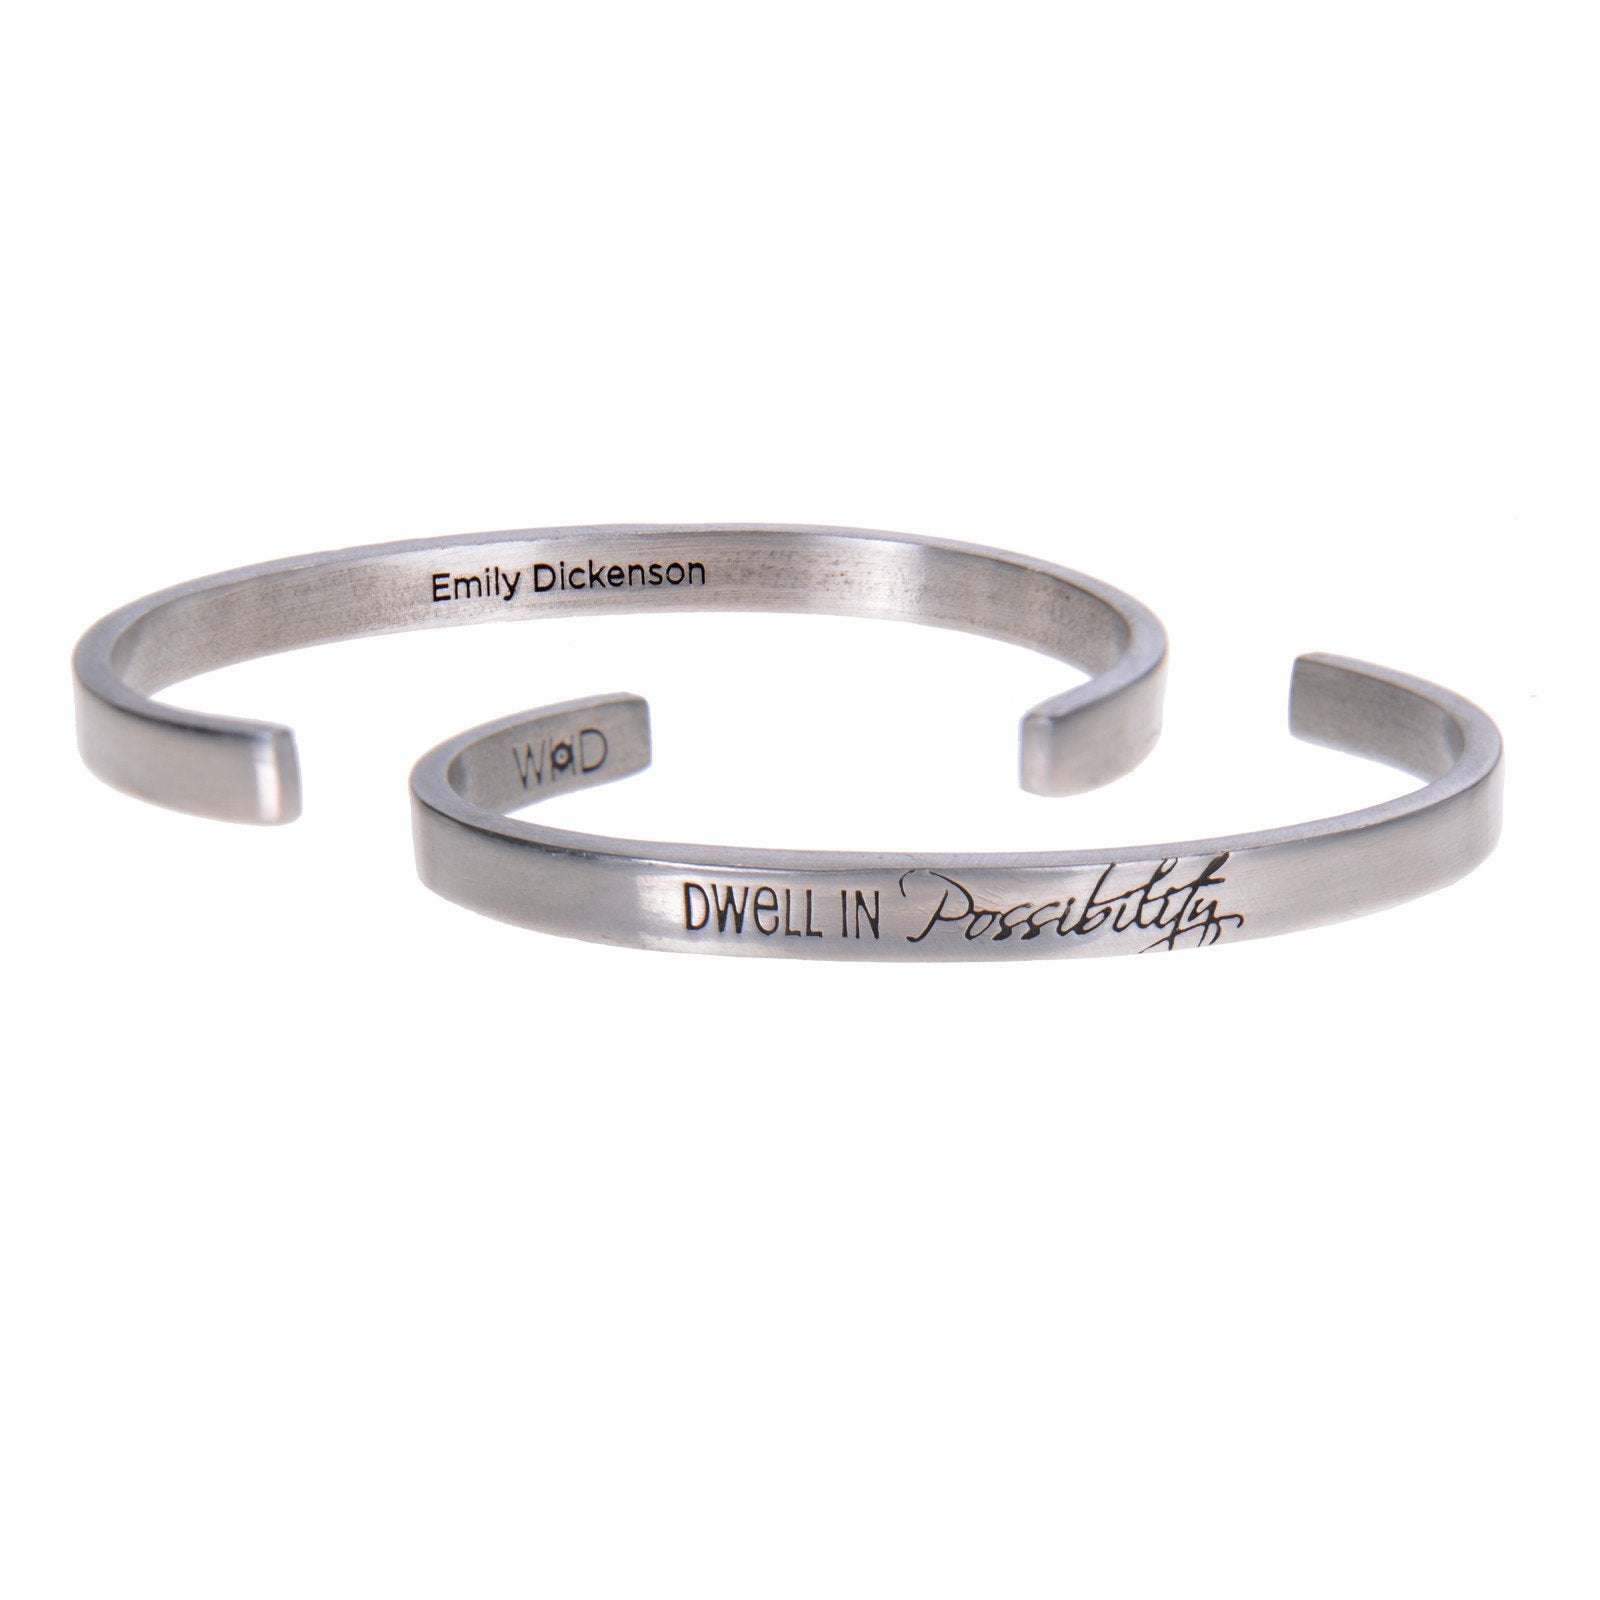 Dwell in Possibility Emily Dickinson Quotable Cuff Bracelet